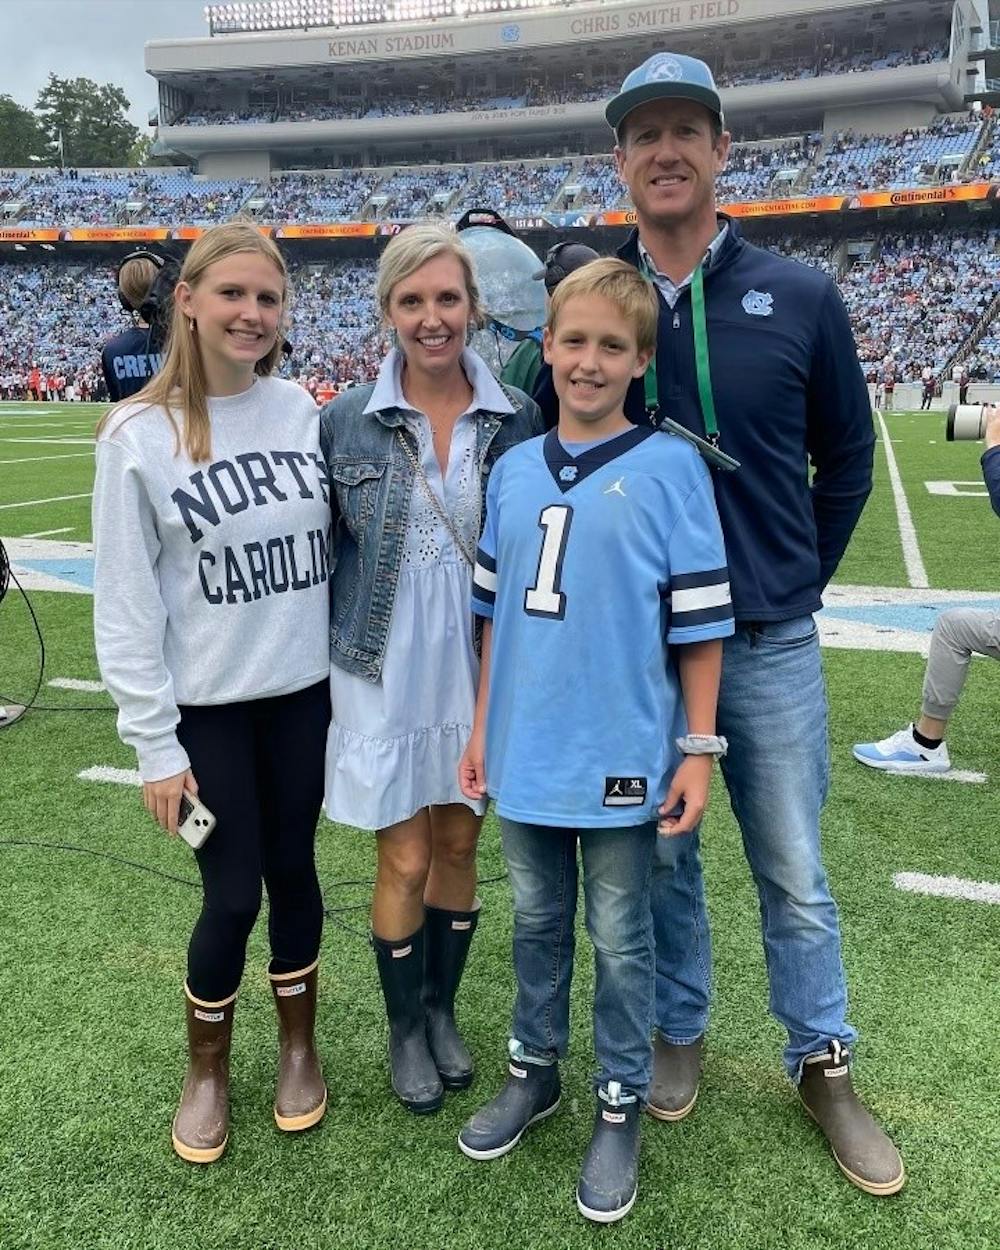 <p>The Fitch family attended the Virginia Tech home football game on Oct. 1, 2022, where Lee Fitch (center) was the UNC Children’s Hospital, “kid champion” of the game. Pictured from left to right: Virginia Fitch, Meredith Fitch, Lee Fitch and David Fitch at Kenan Stadium. Photo by Jon Leggette and courtesy of The Finch Family.</p>